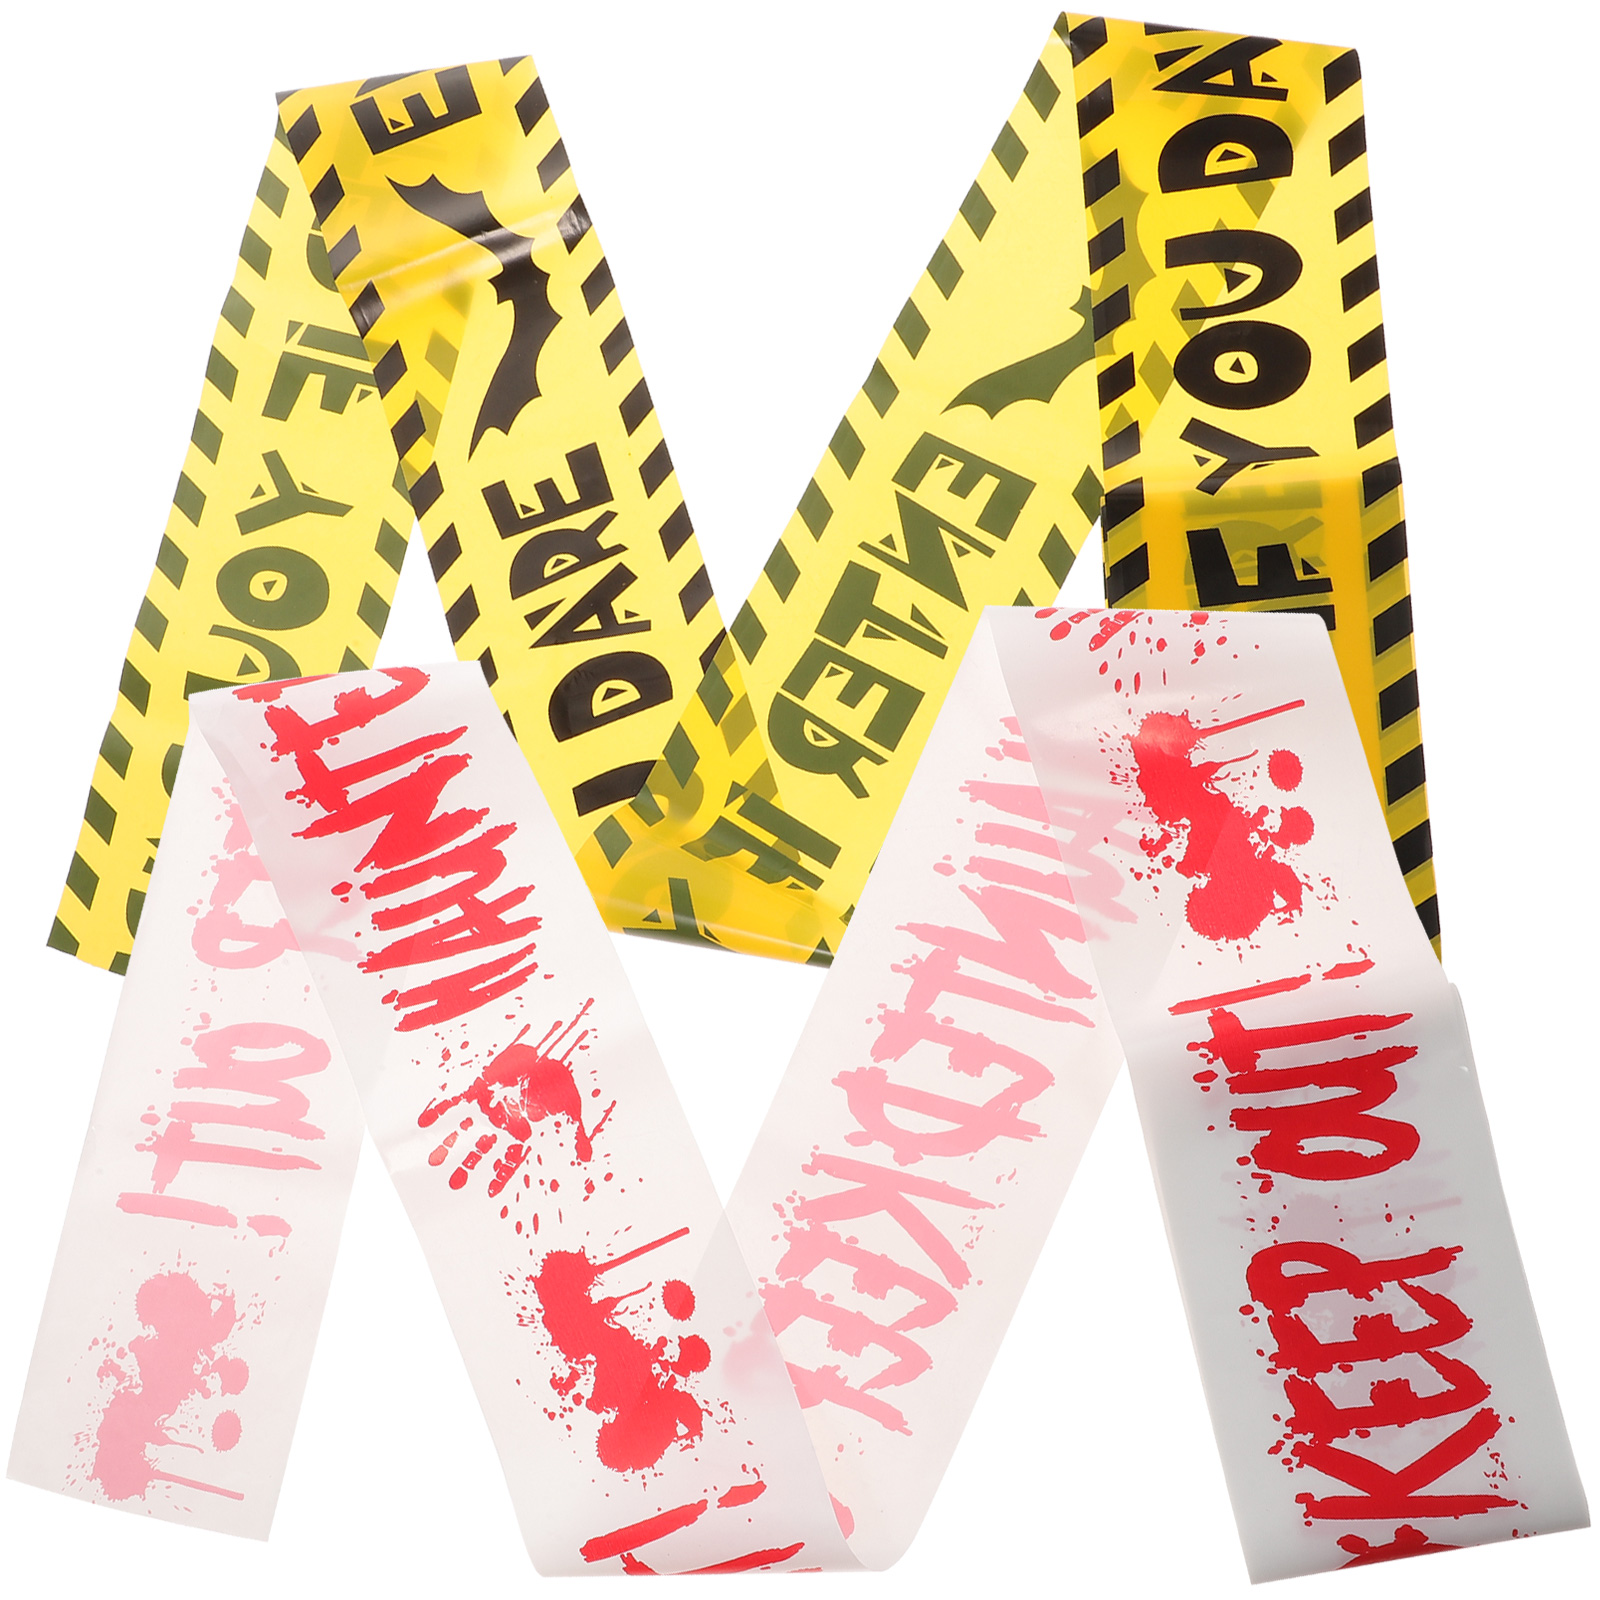 Warning Tape Decor Halloween Safety Fright Isolation European and American 2 Pcs - image 1 of 6